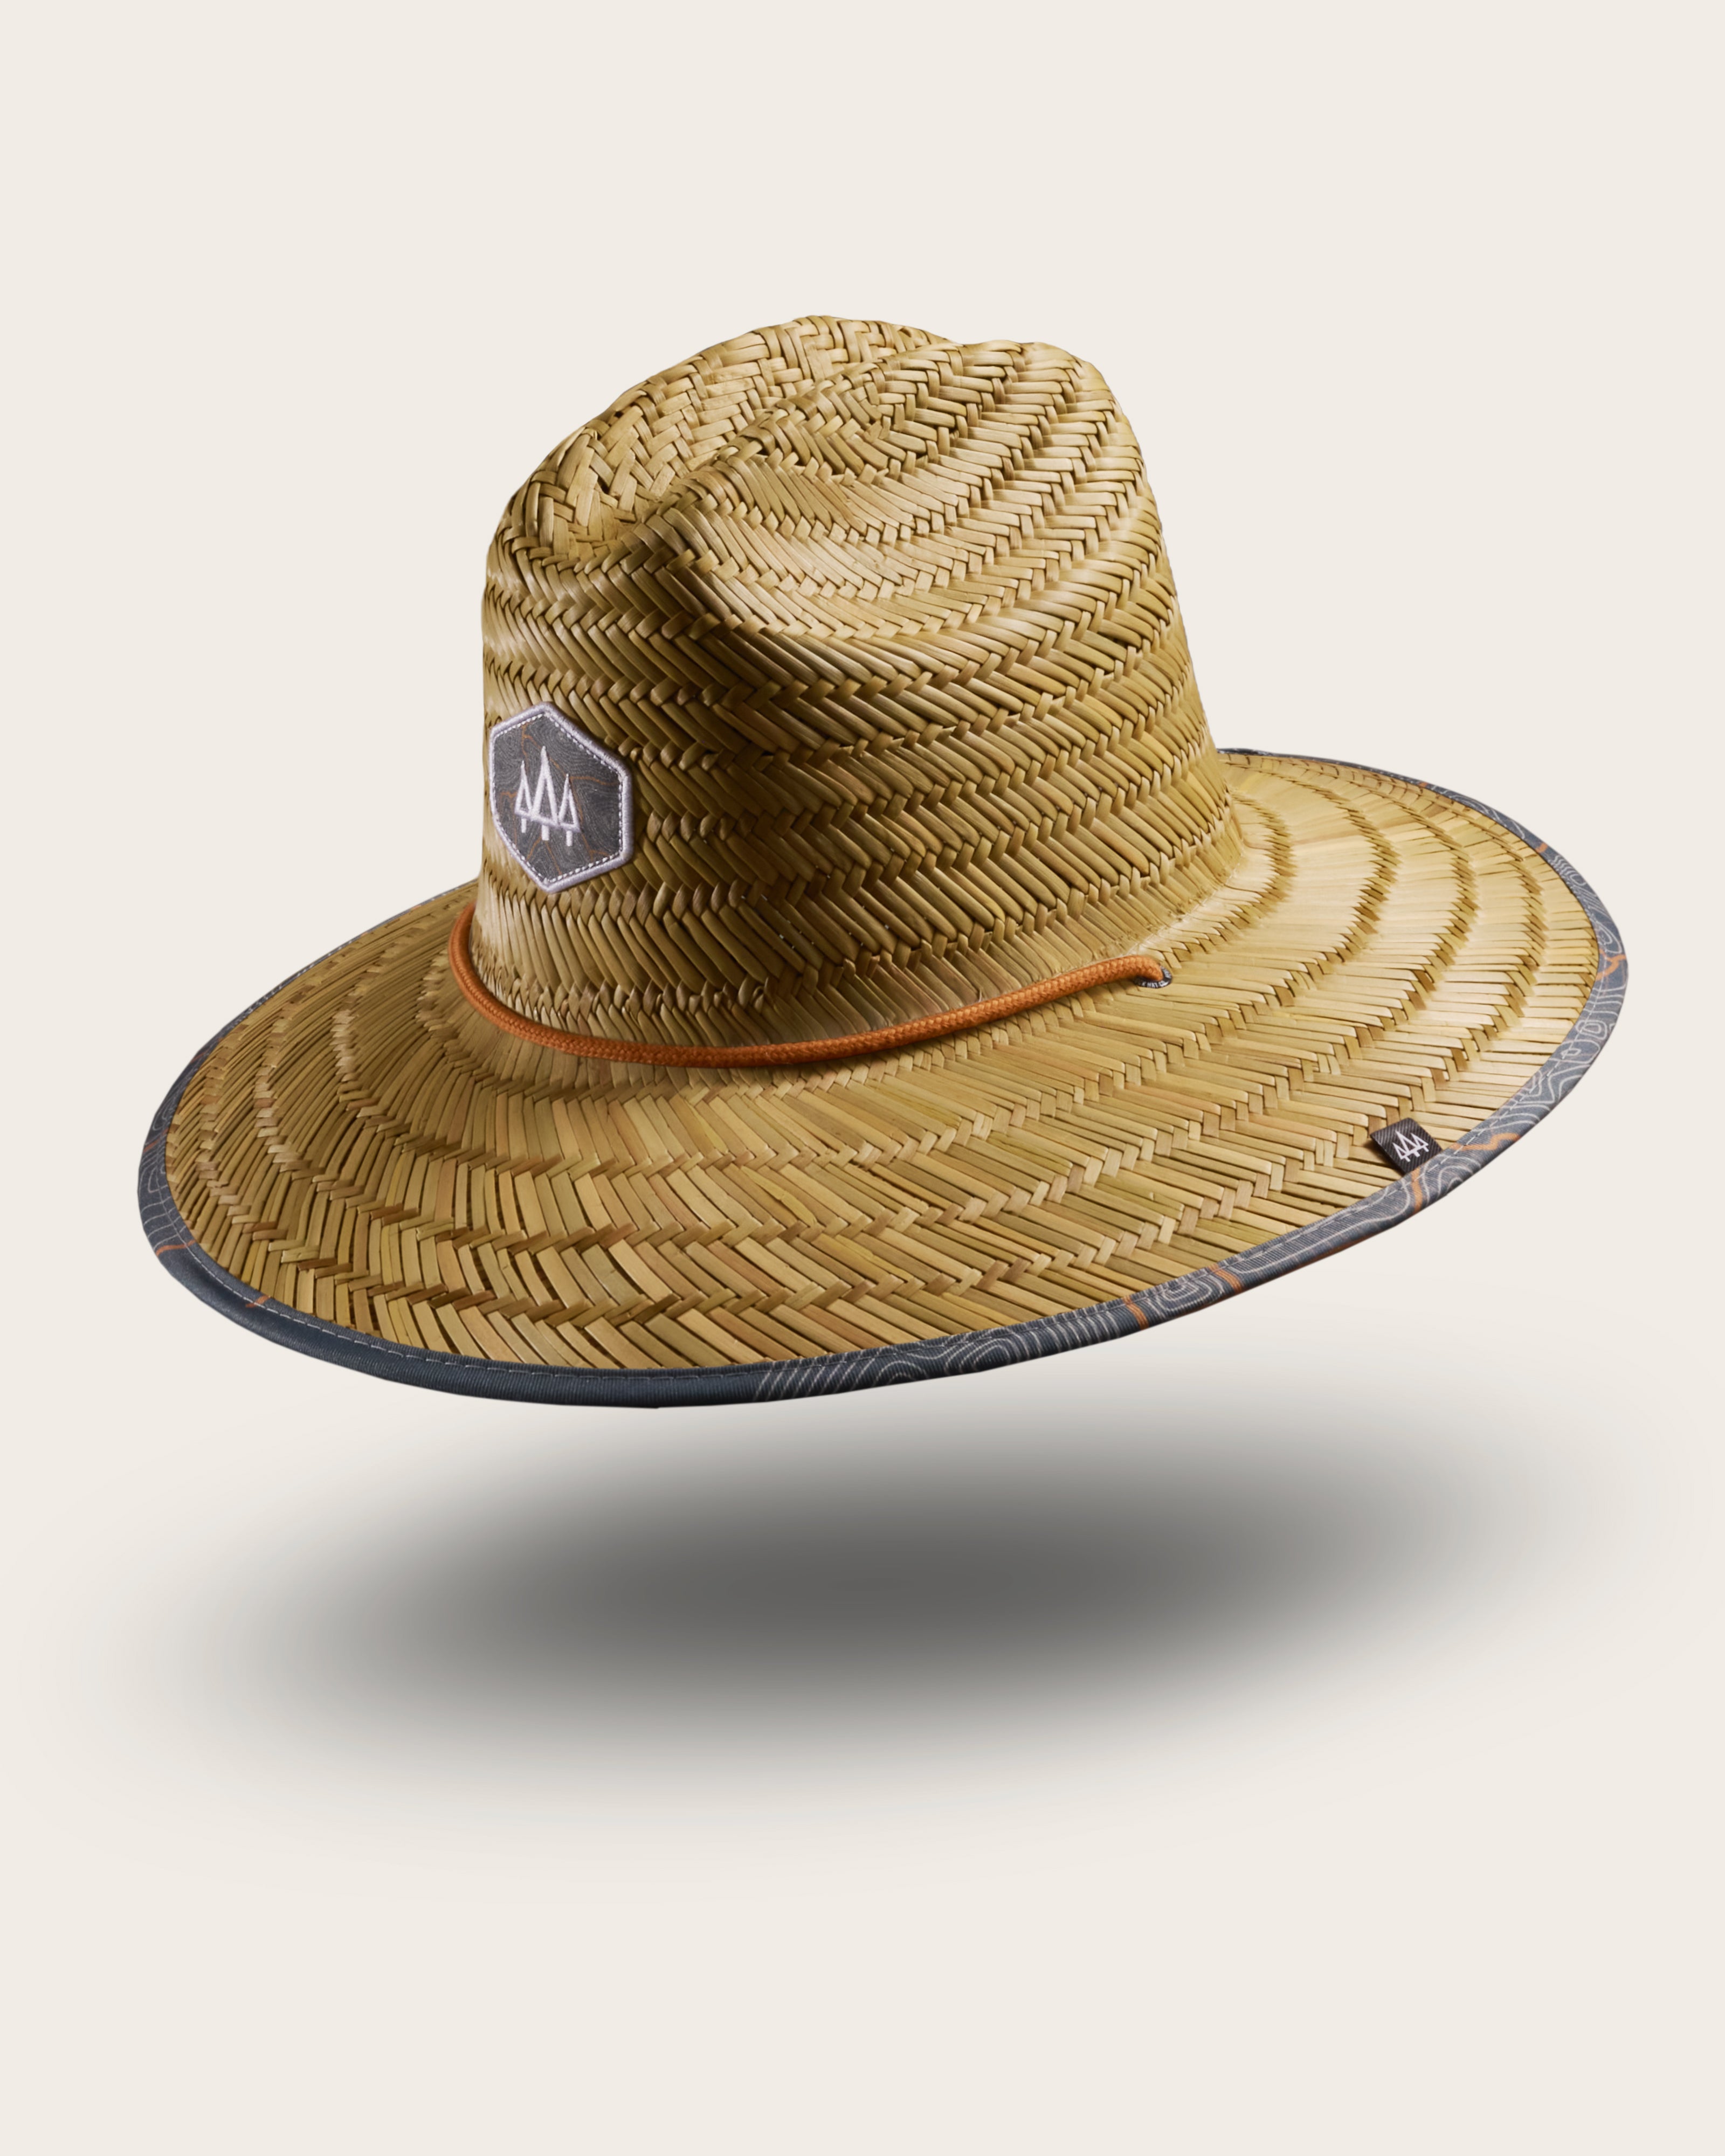 Hemlock Nomad straw lifeguard hat with topography pattern with patch